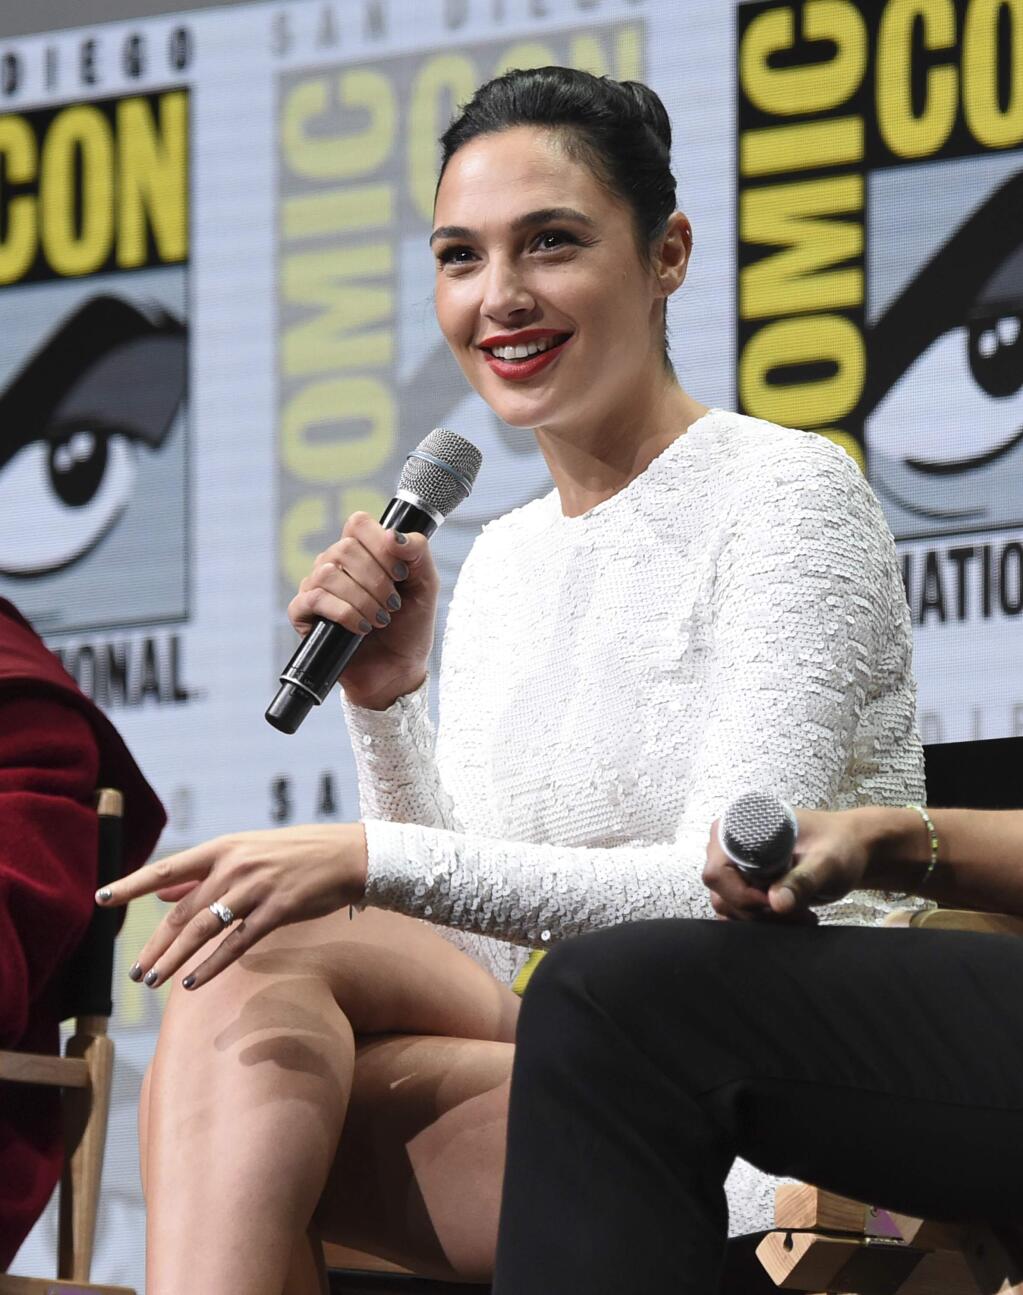 Gal Gadot speaks at the Warner Bros. 'Justice League' panel on day three of Comic-Con International on Saturday, July 22, 2017, in San Diego. (Photo by Richard Shotwell/Invision/AP)